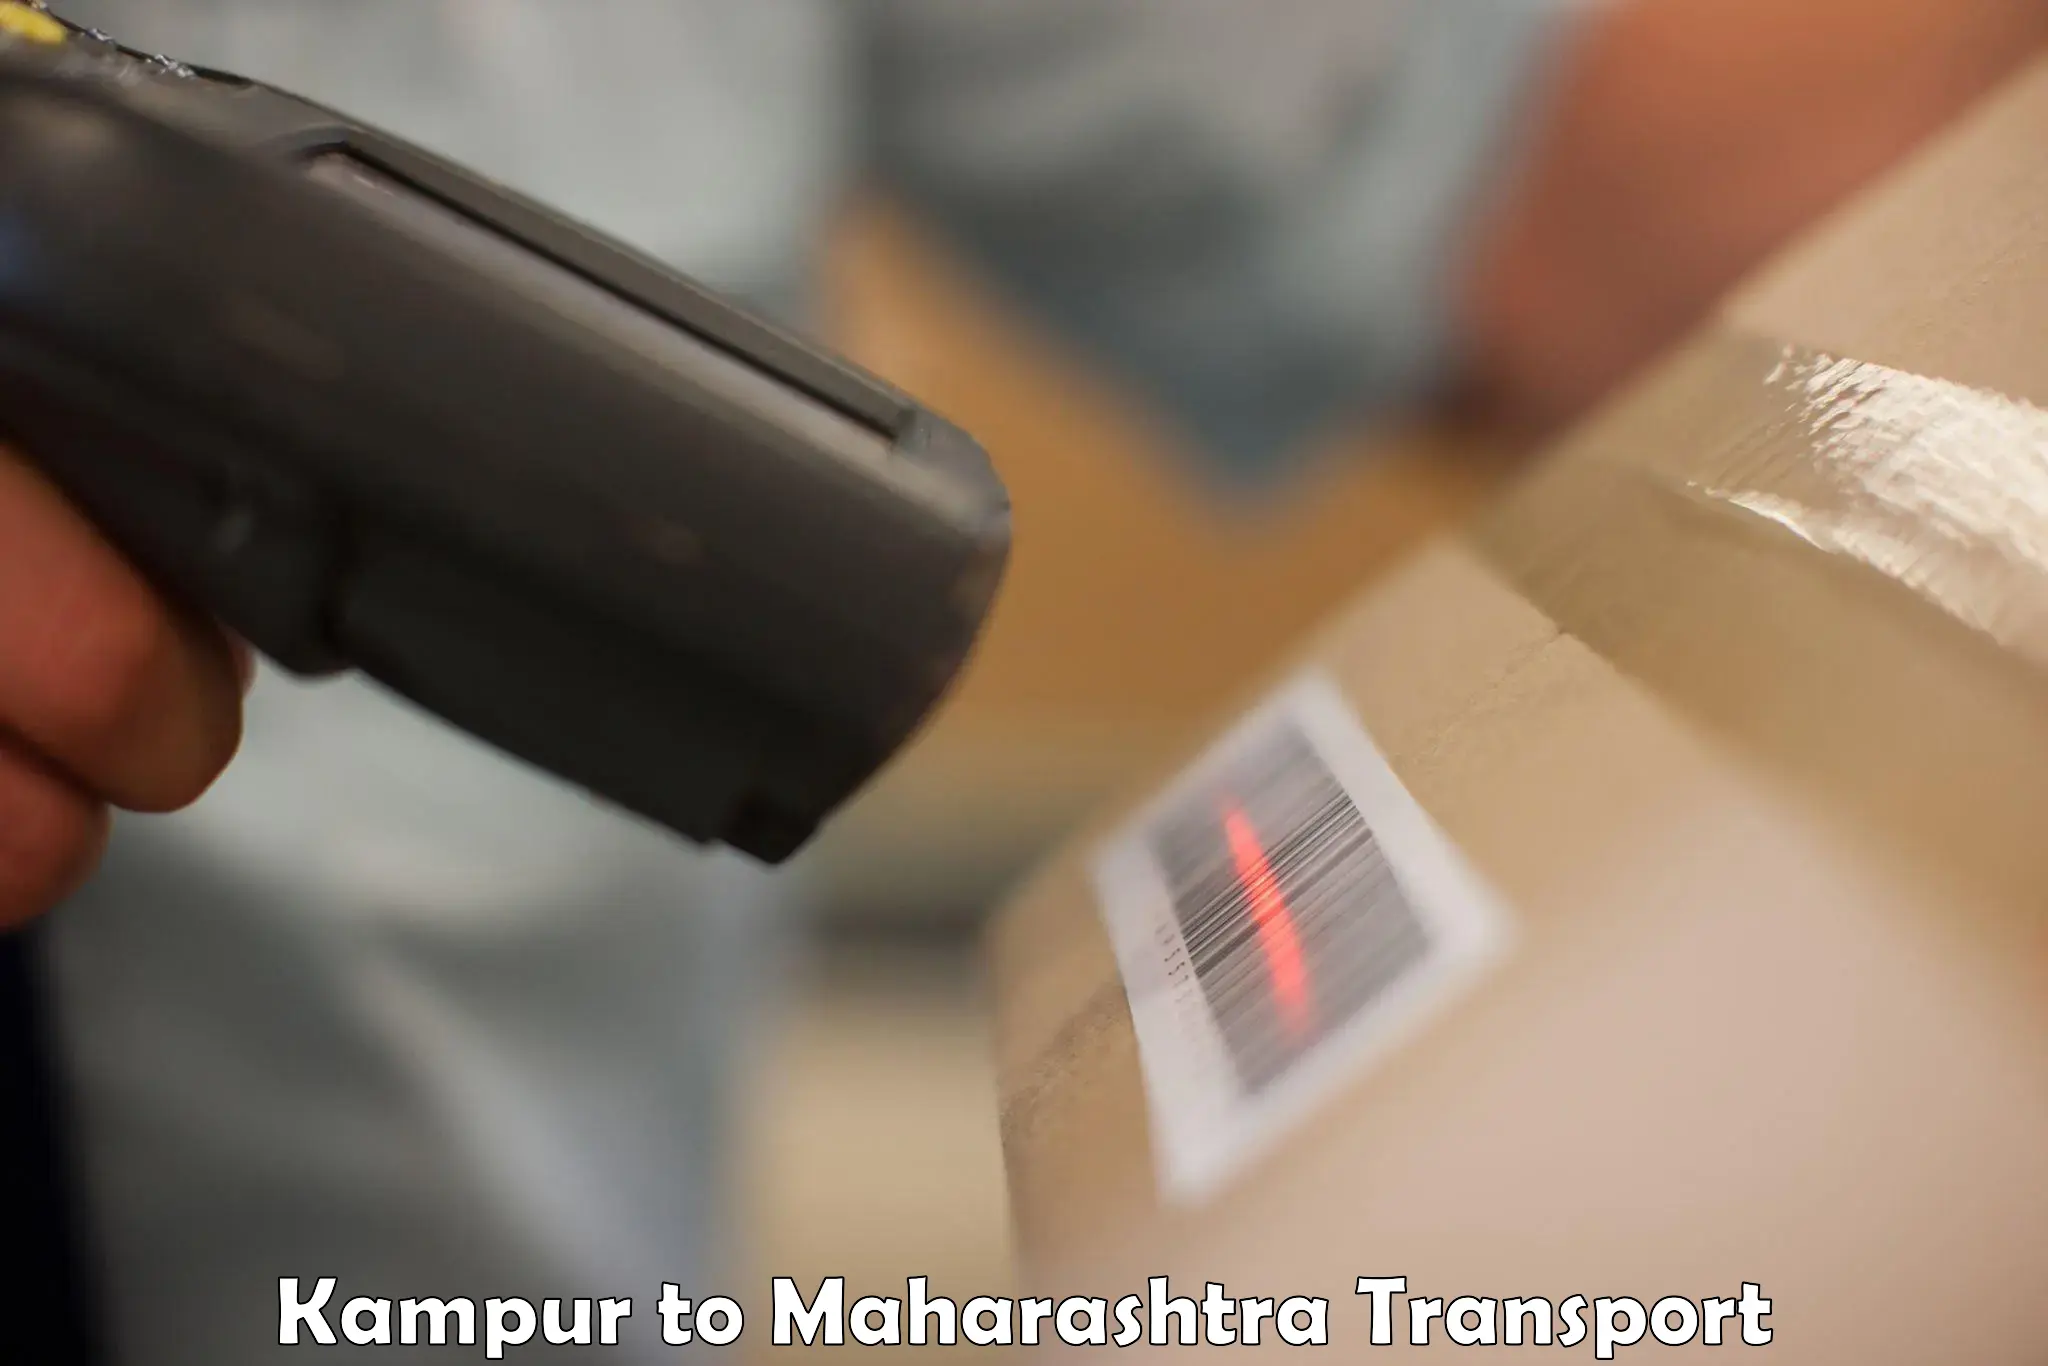 Parcel transport services in Kampur to Nagpur